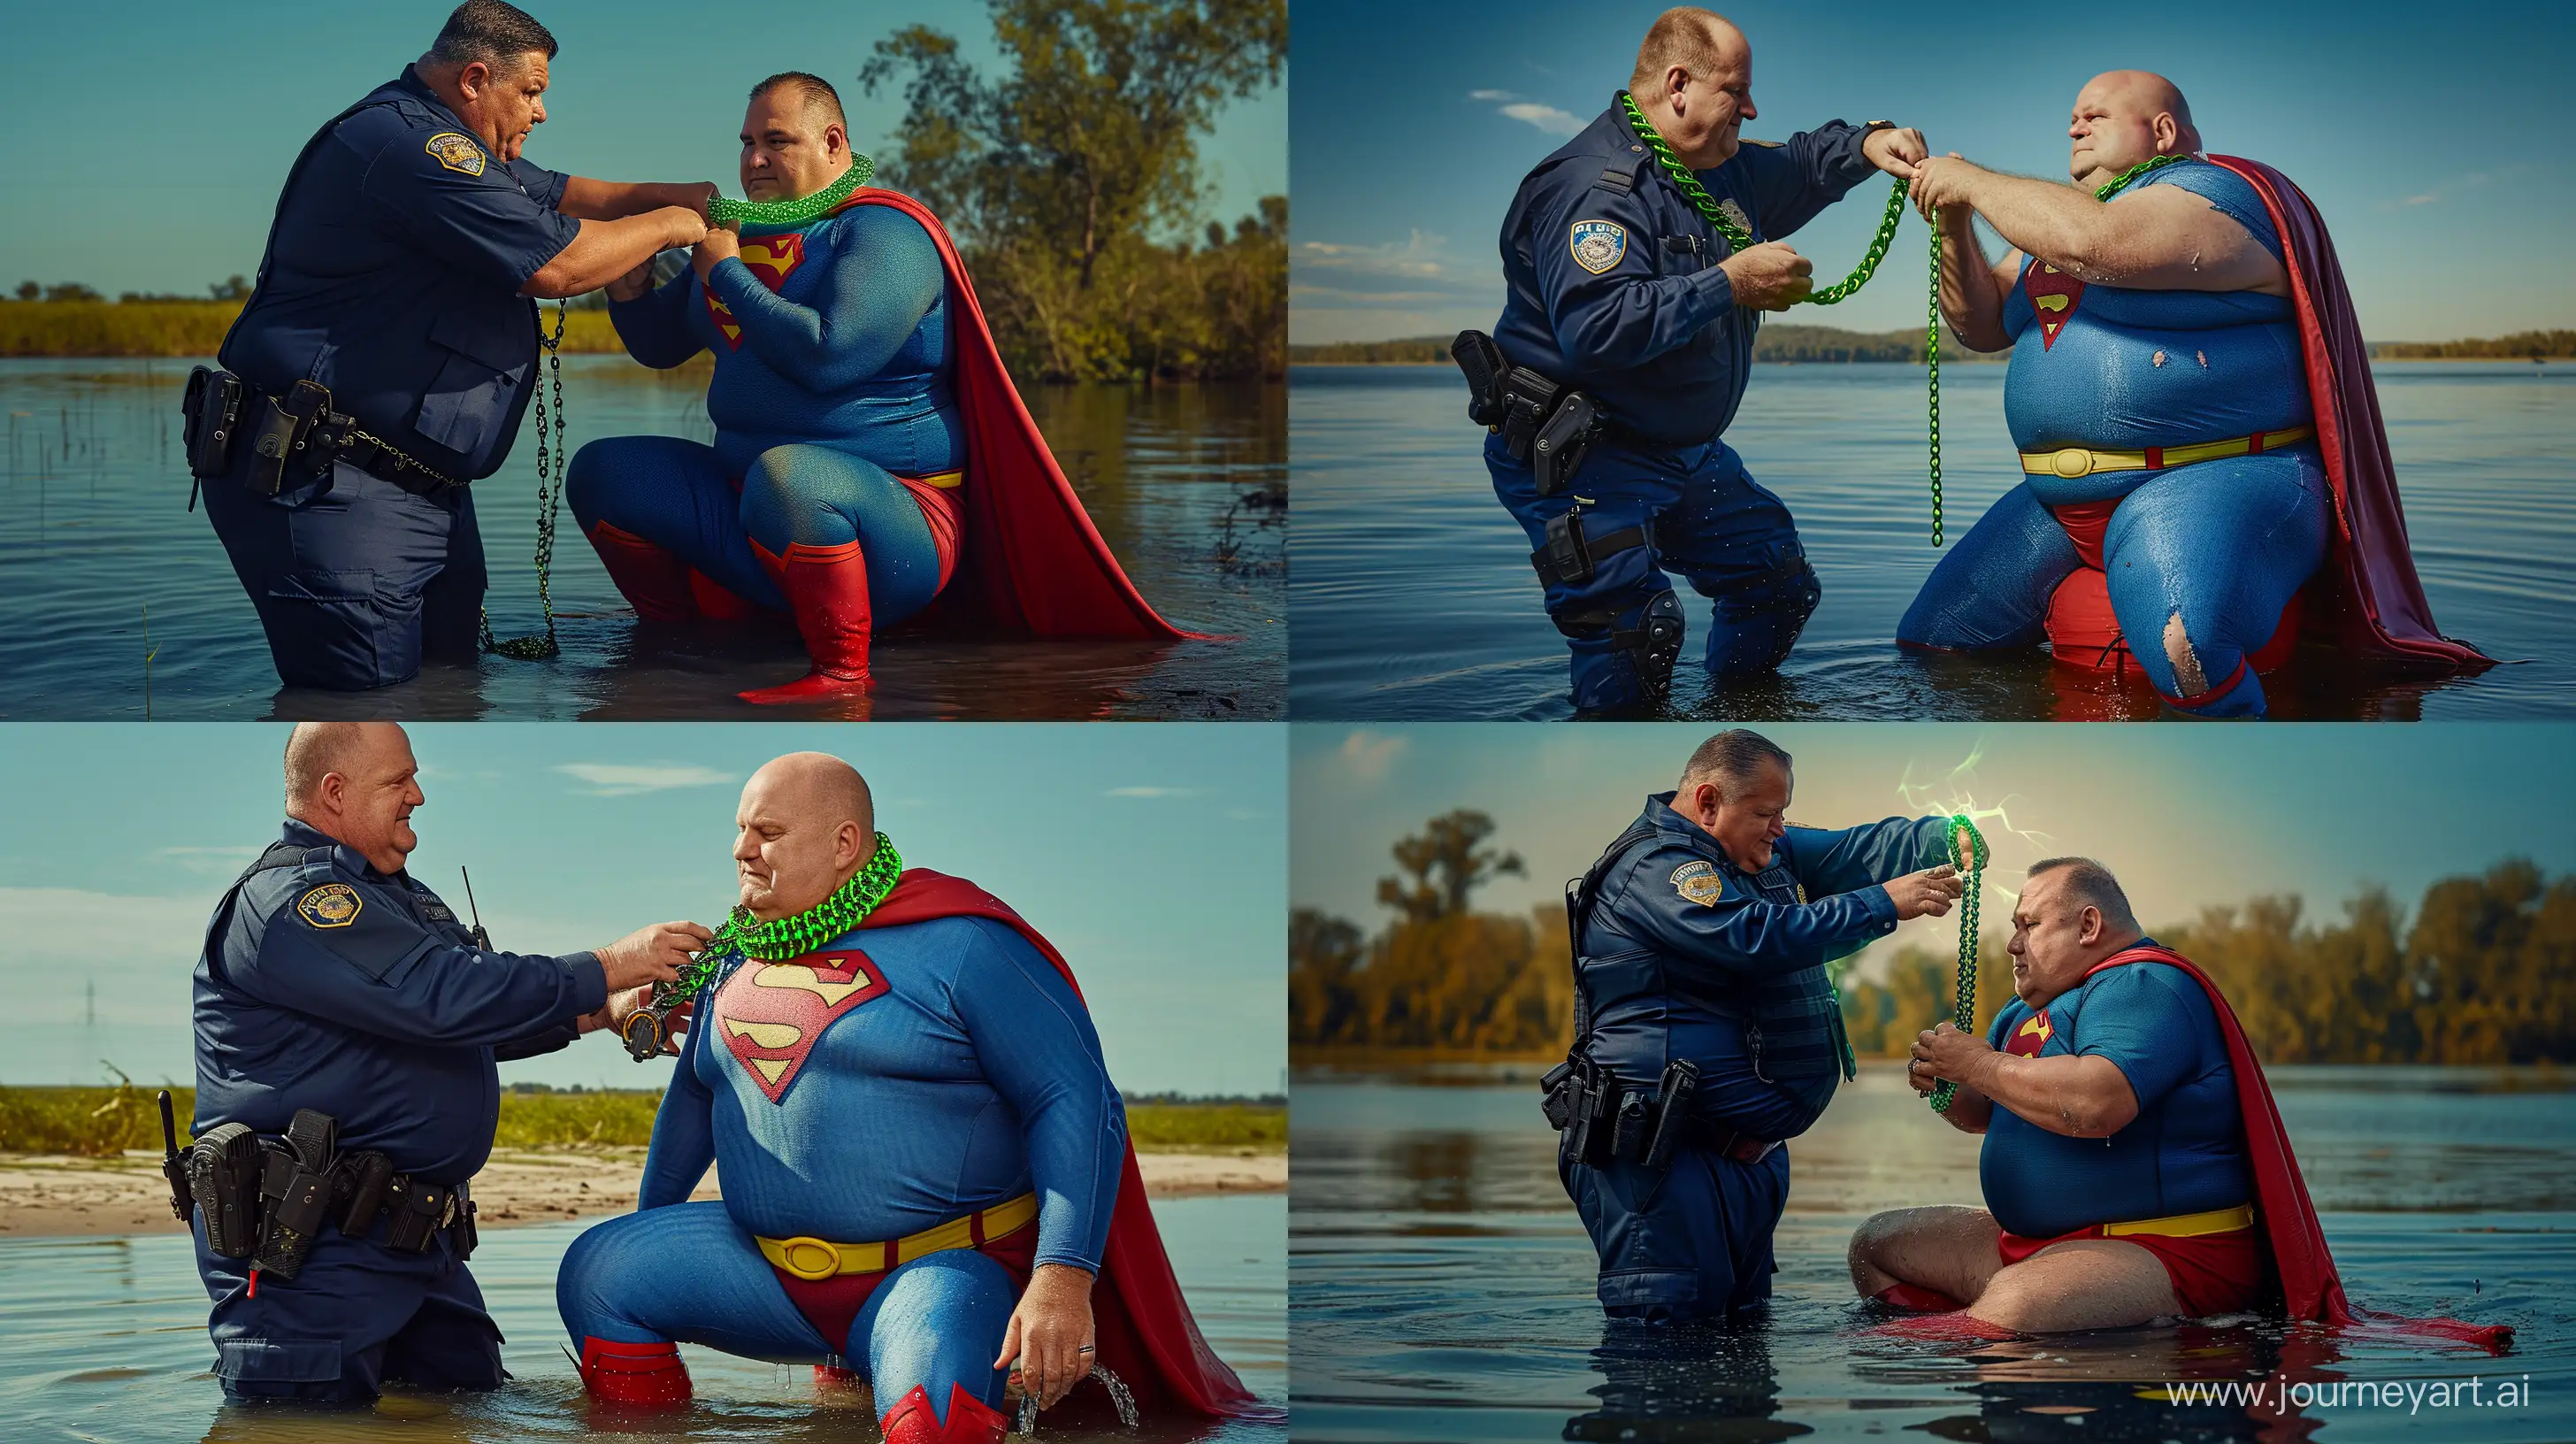 Photo of a chubby man aged 70. Wearing a navy silky blue tactical police jumpsuit. He is tightening a green necklace around the neck of another man. The other man is a chubby man aged 70 dressed in a clean silky blue superman costume with a big red cape, red boots, blue shirt, blue pants, yellow belt and red trunks sitting in the water, and has a heavy glowing green chain collar around his neck. Outside. --style raw --ar 16:9 --v 6